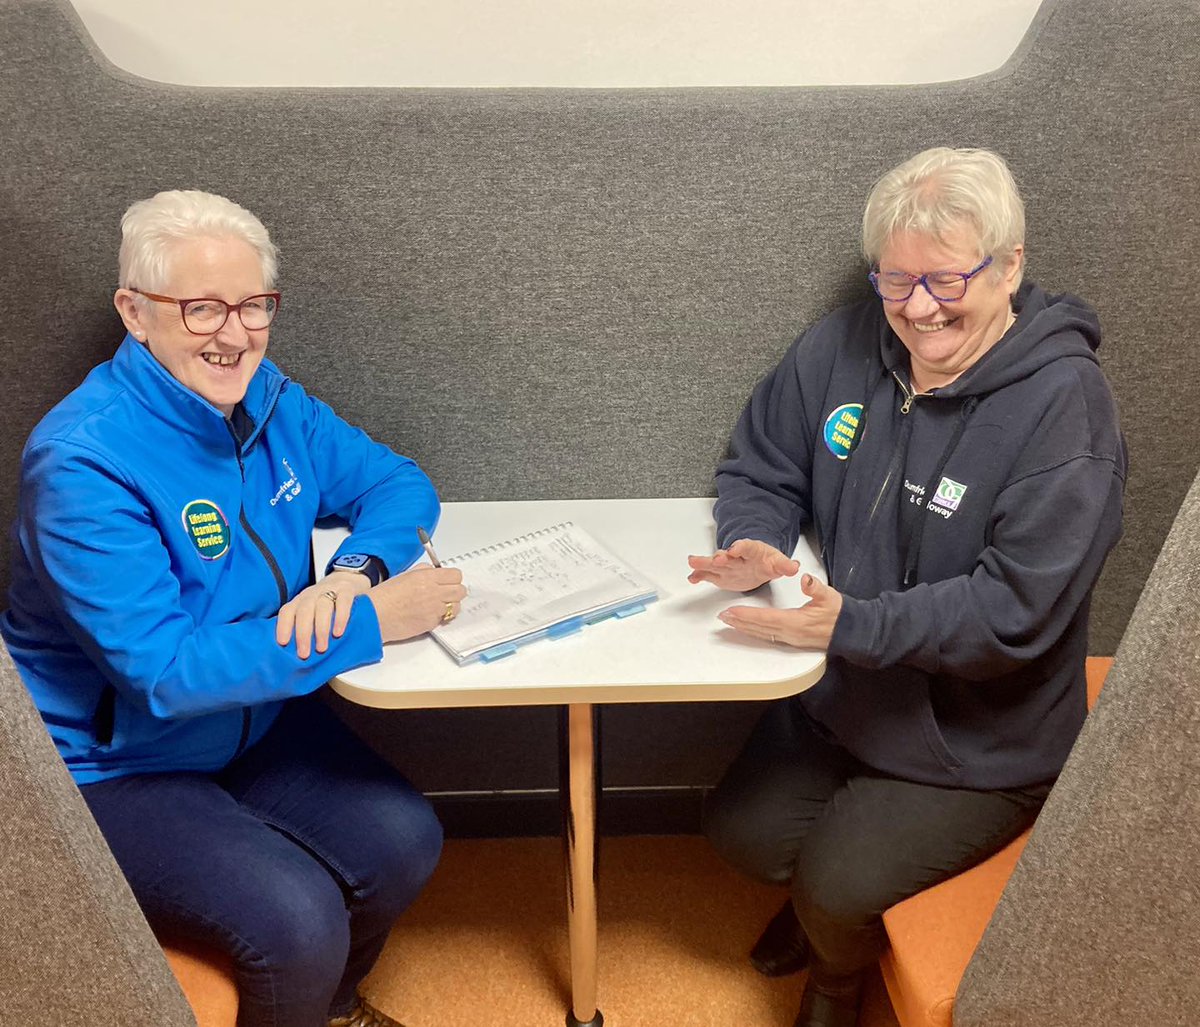 Susan and Jean are all smiles planning the new 'Elfies Project!' Watch this space for further updates! @SLPLearn #dreamteam #Everythingadultlearning